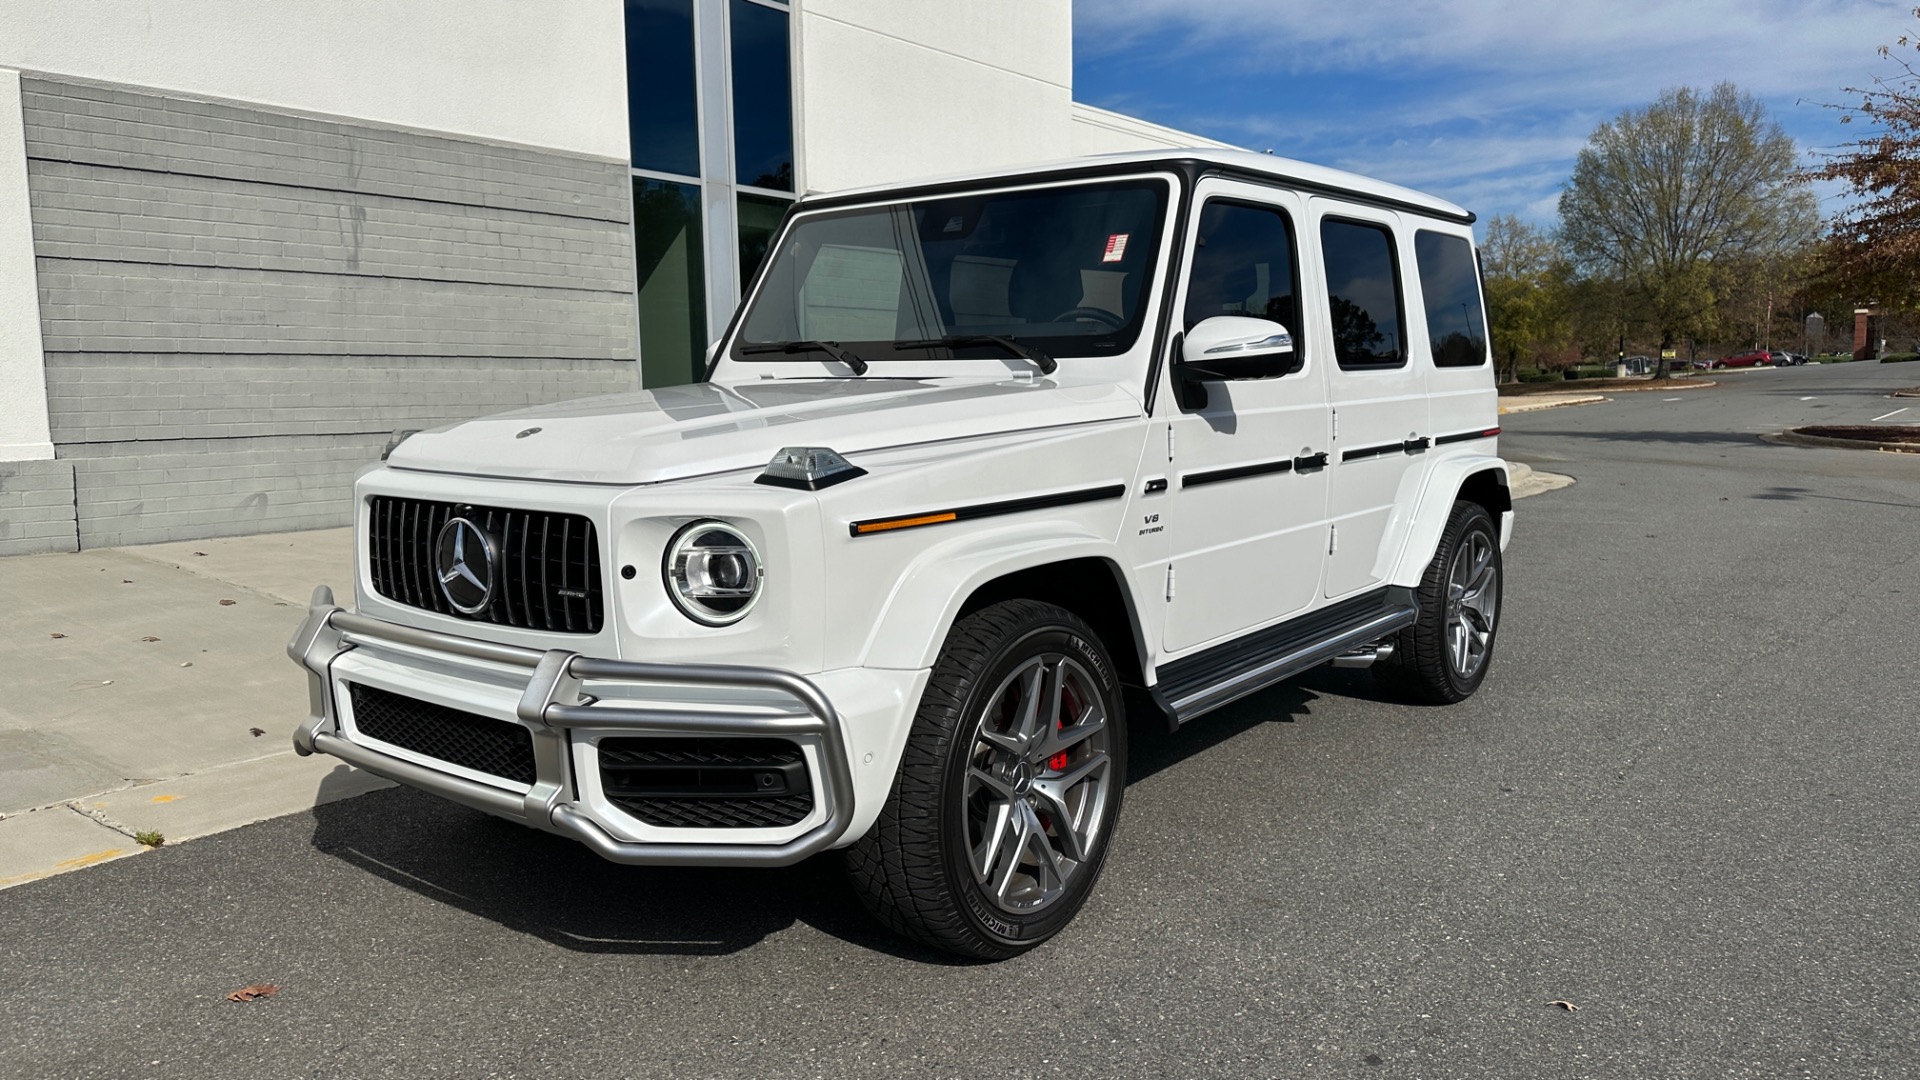 Used 2021 Mercedes-Benz G-Class AMG G63 / AMG EXCLUSIVE INTERIOR / CARBON FIBER / DIAMOND STITCH / 21IN AMG for sale $229,000 at Formula Imports in Charlotte NC 28227 5